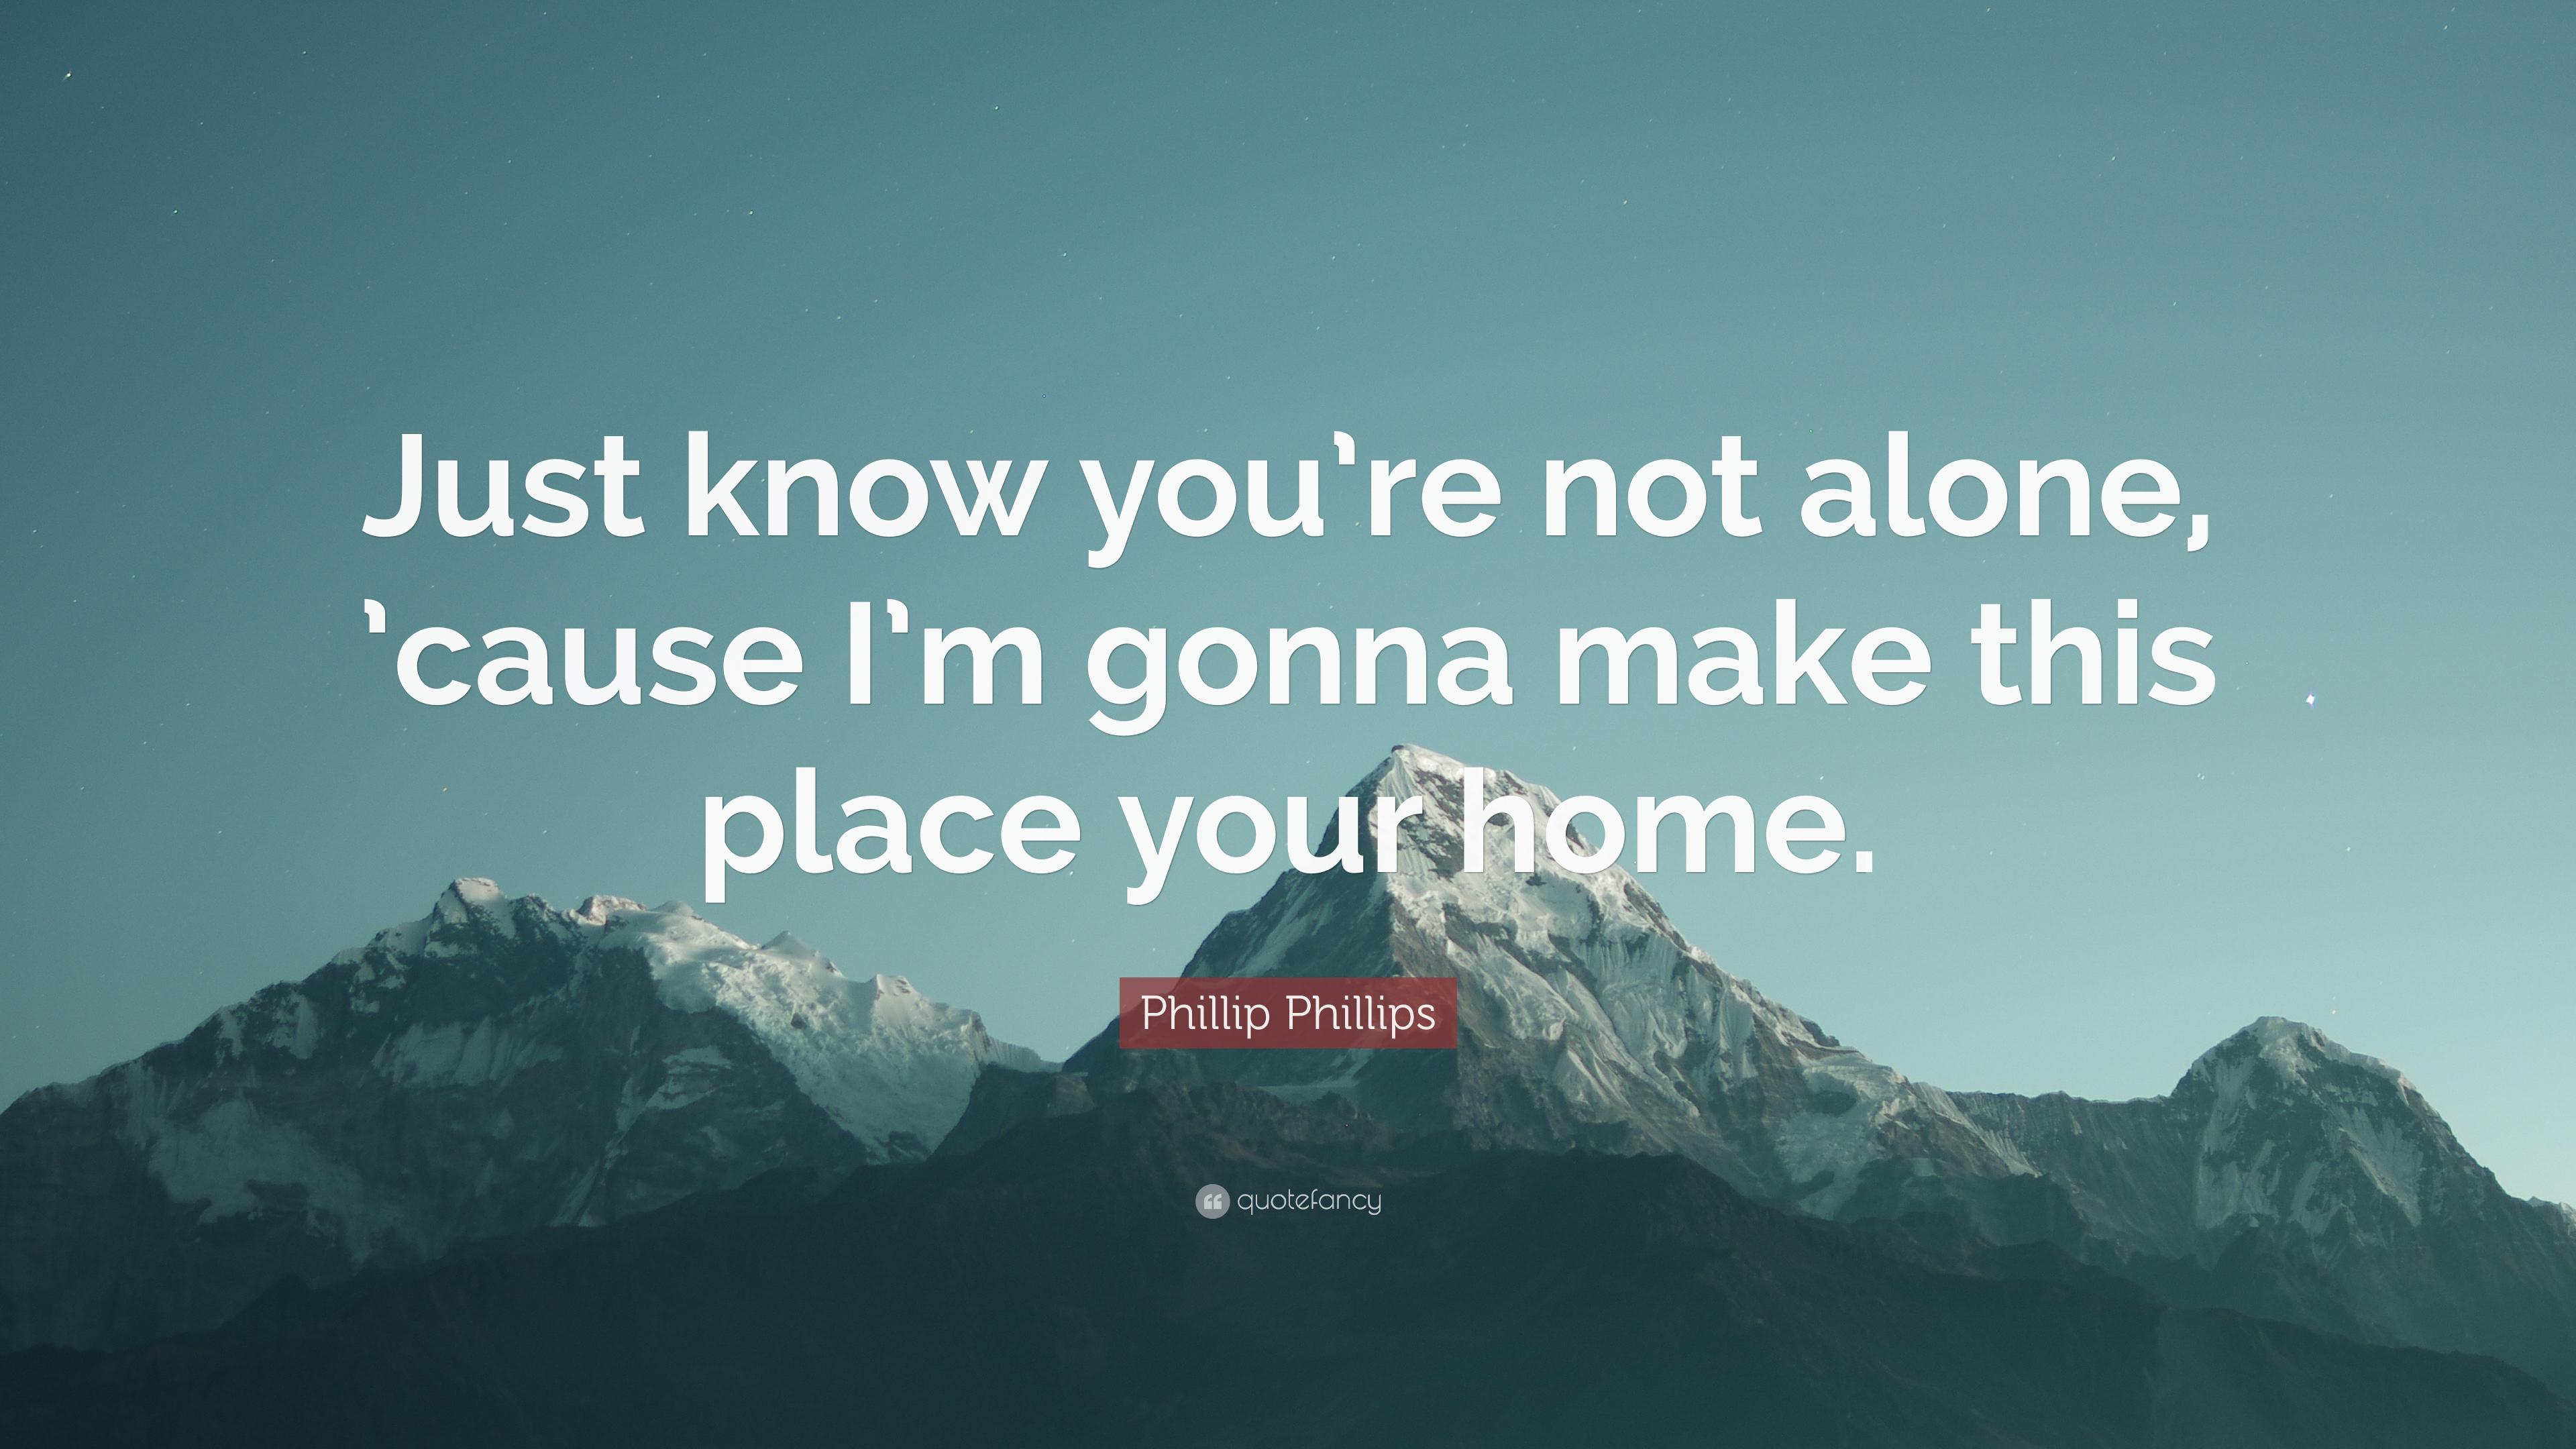 Phillip Phillips Quote: “Just know you're not alone, 'cause I'm